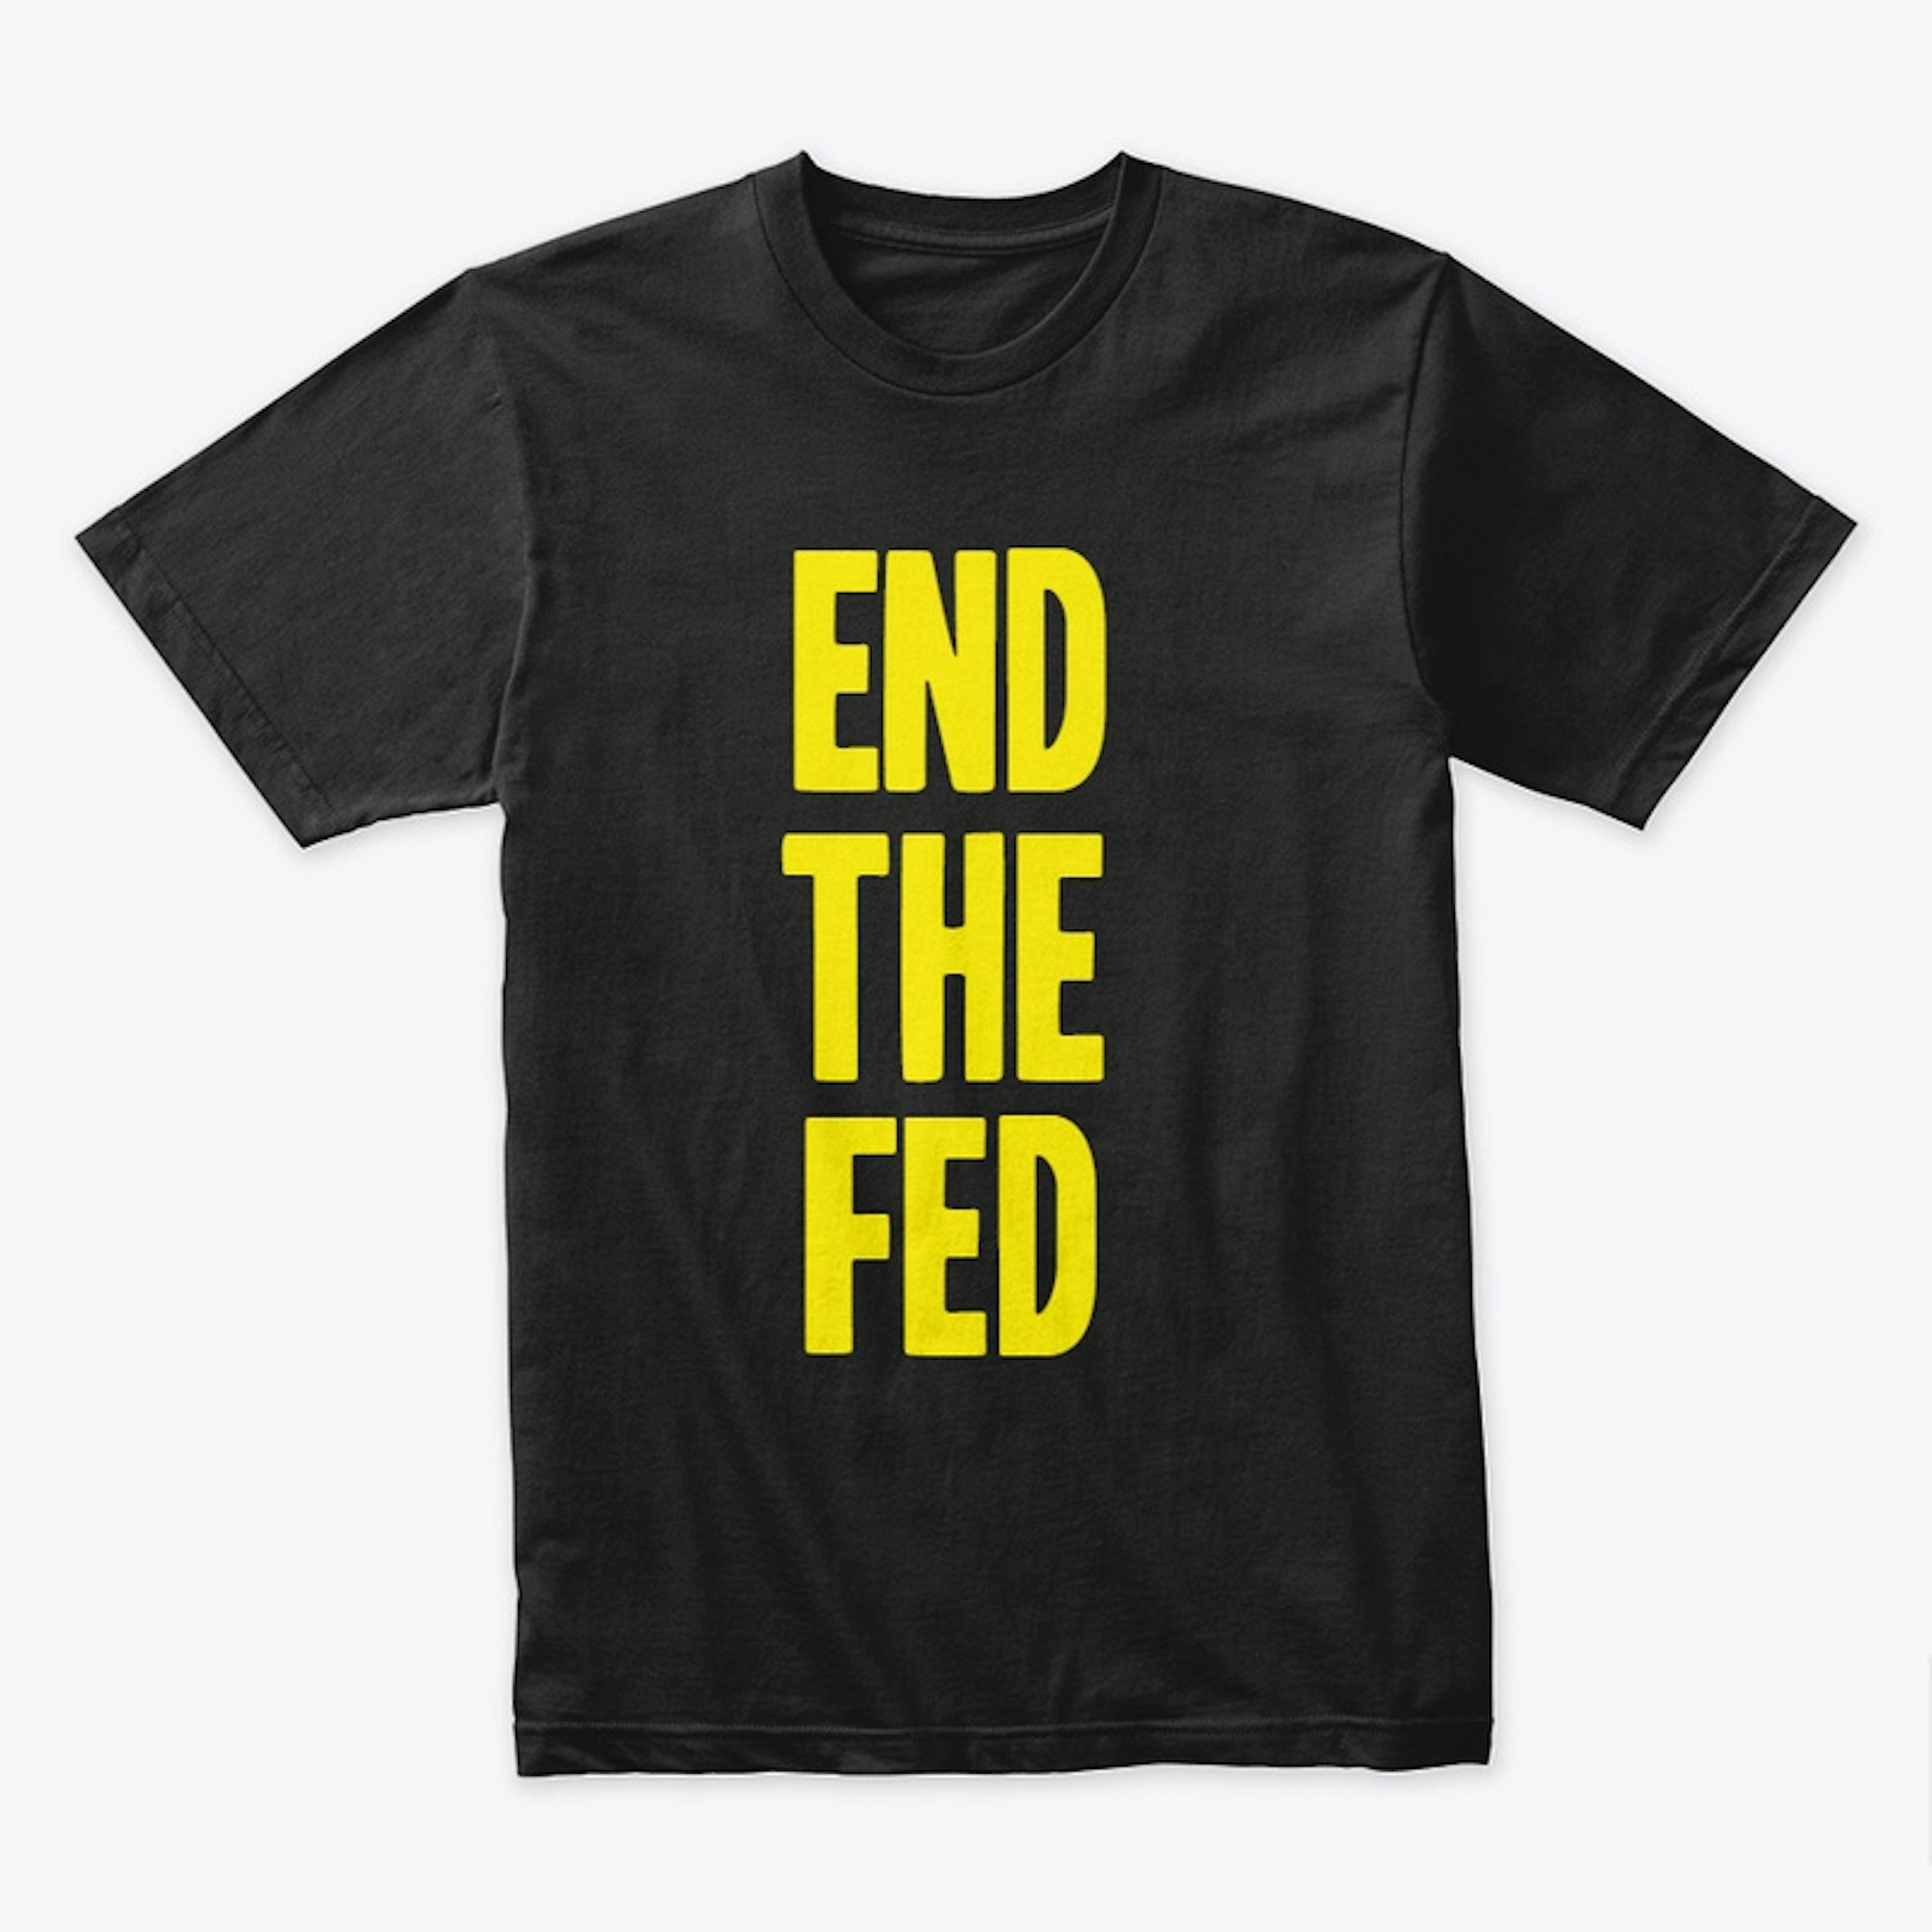 End The Fed!